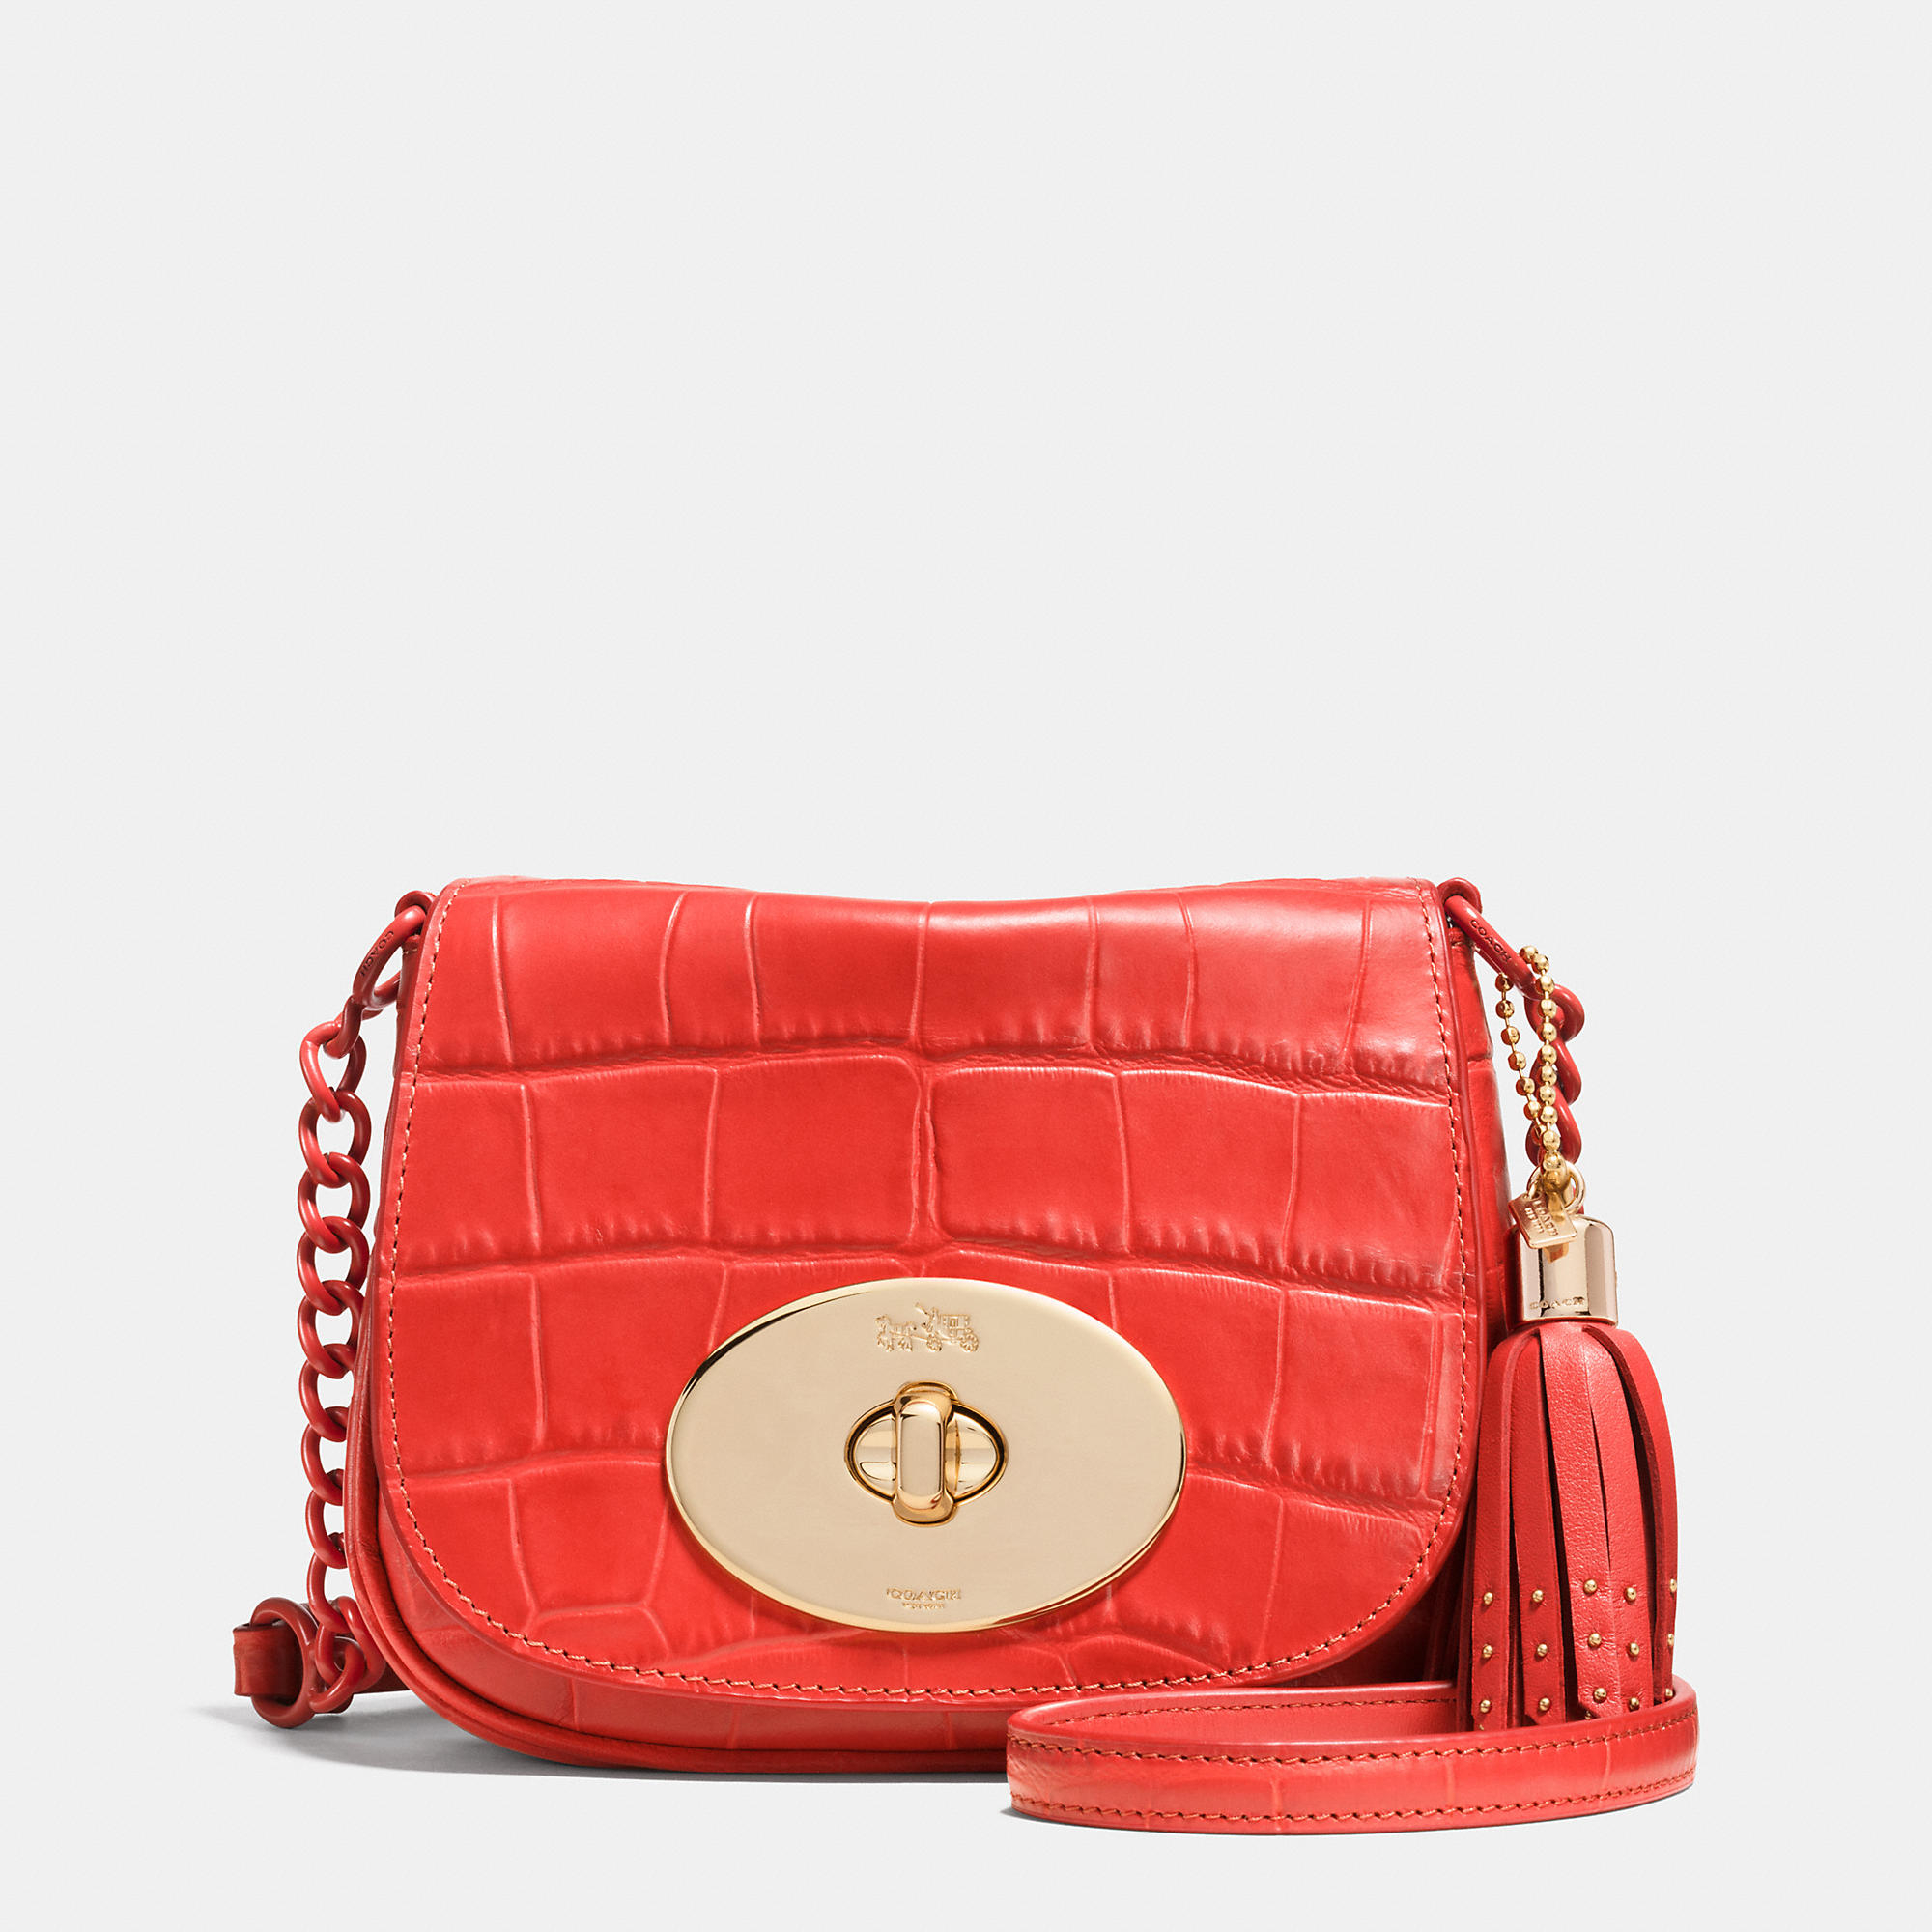 Lyst - Coach Liv Crossbody In Croc Embossed Leather in Red